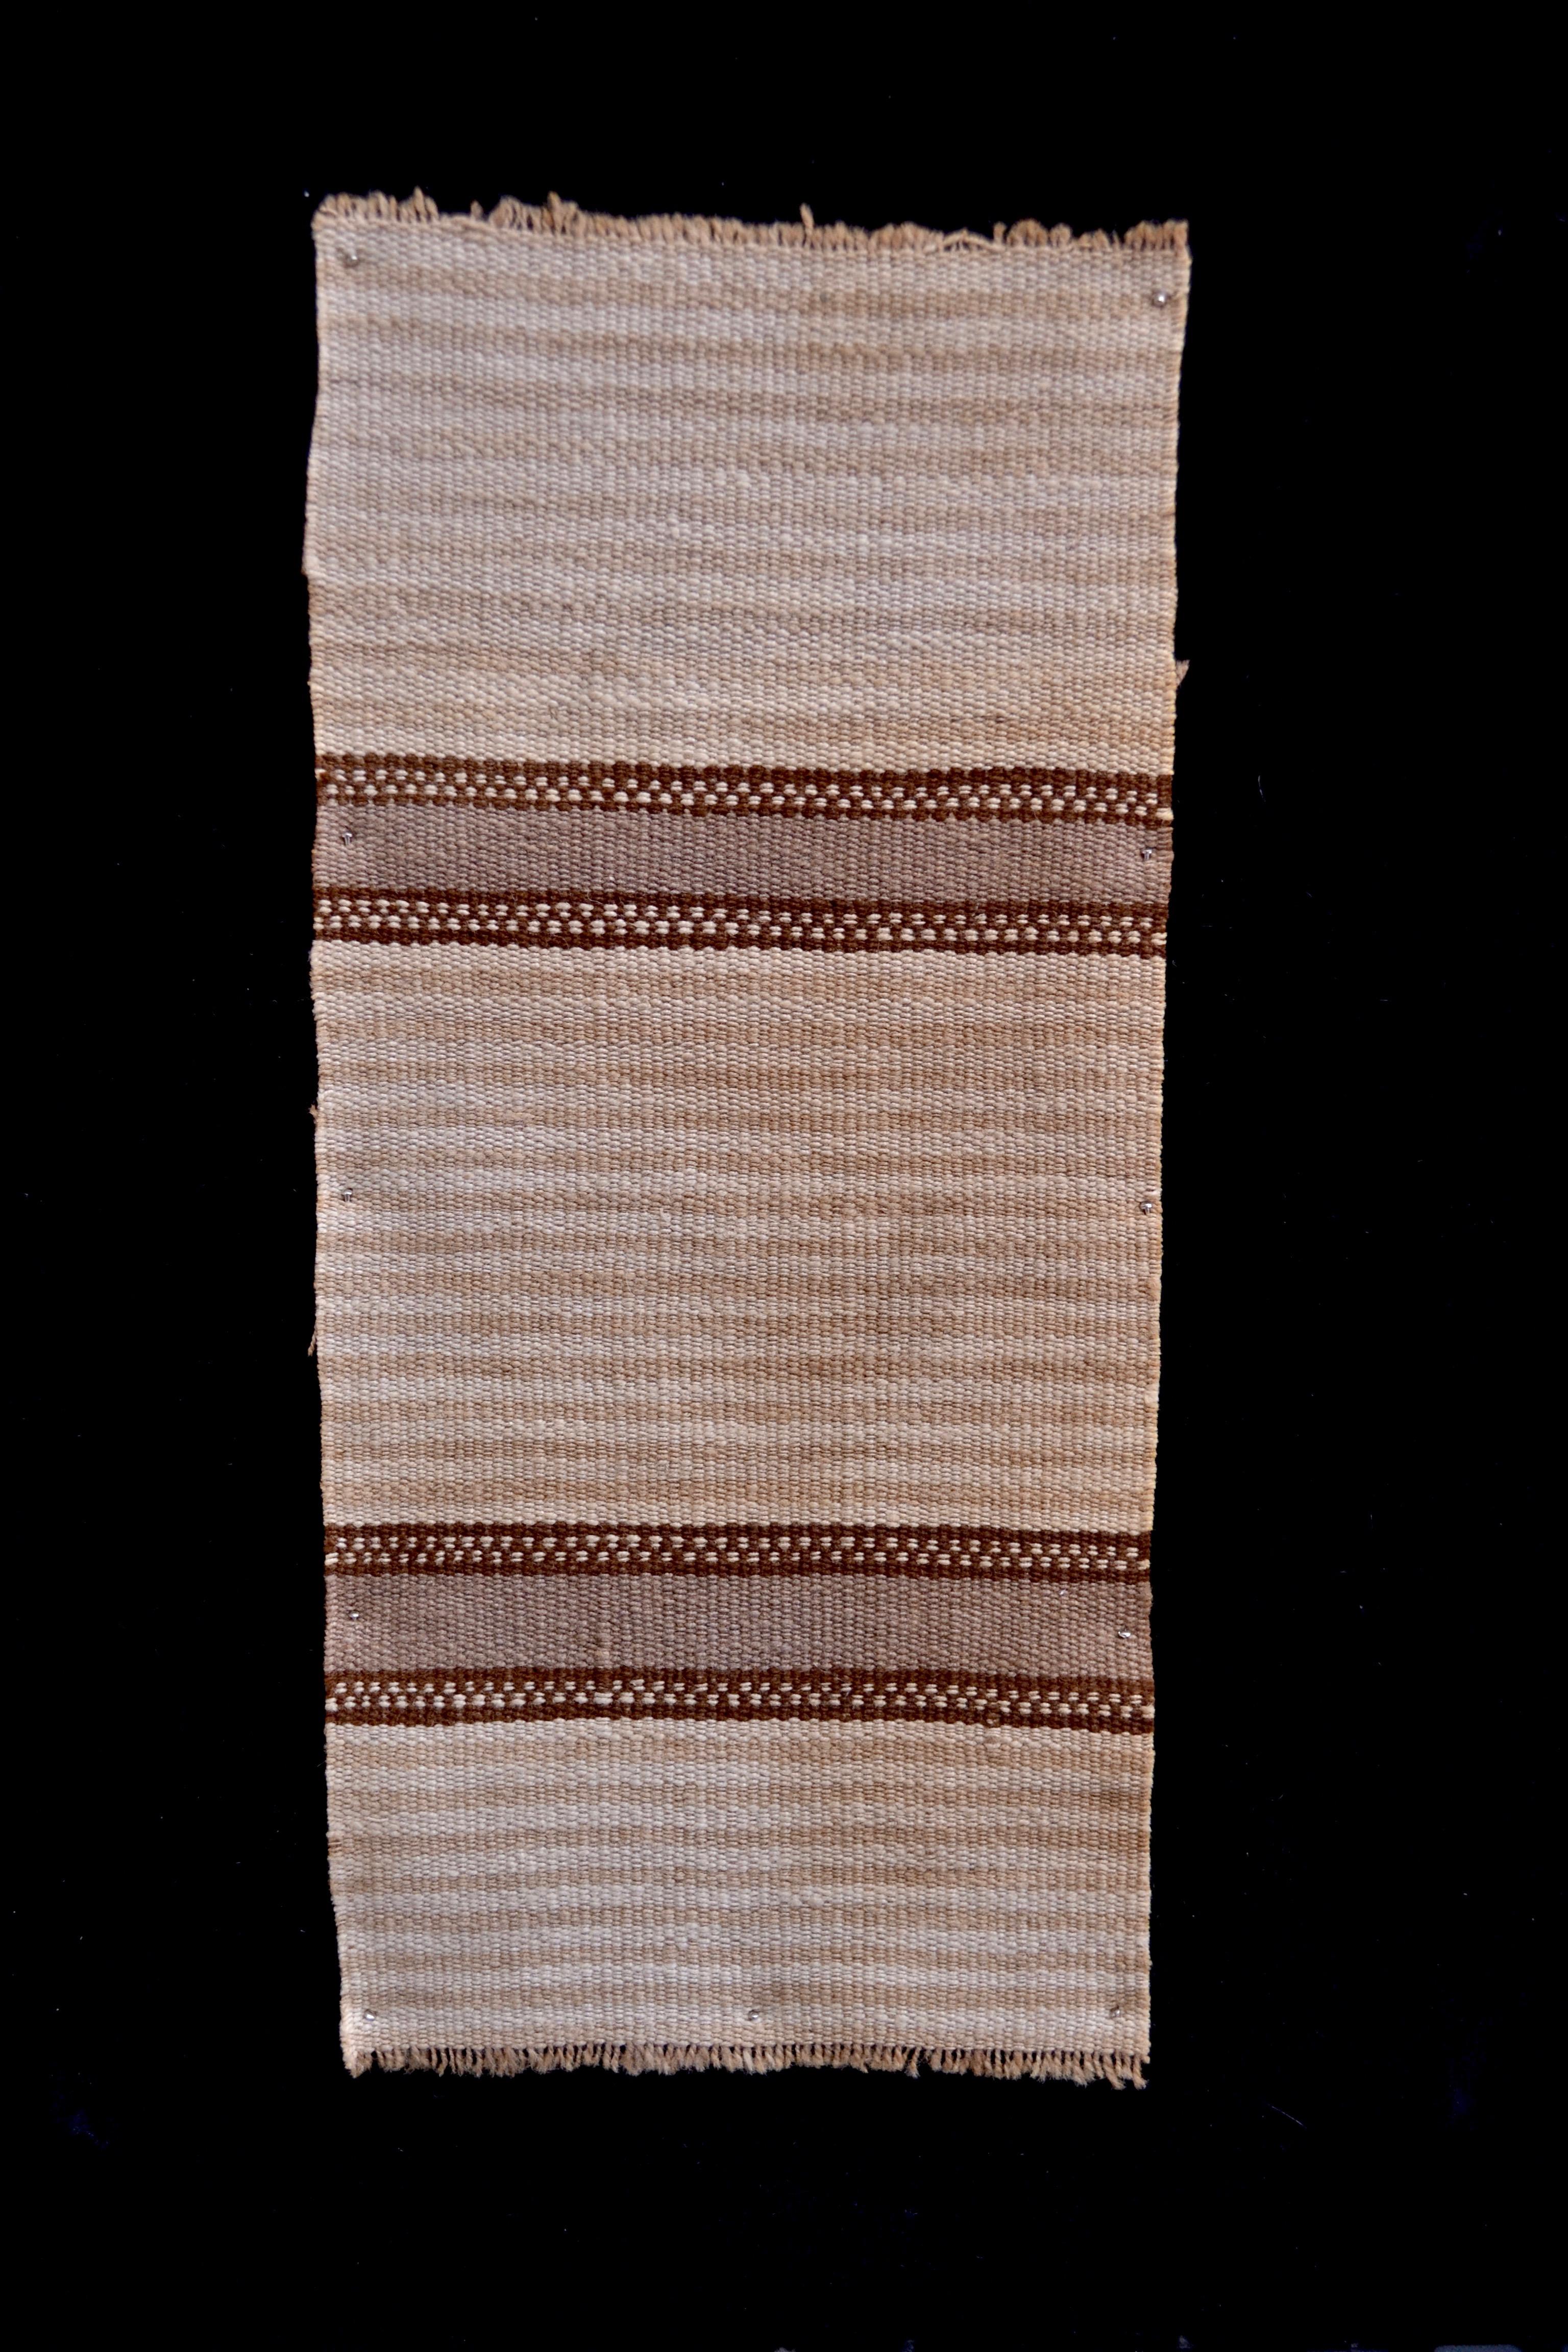 Earth tones adorn this striped pattern pre-Columbian textile. These piece is mounted on a black shadowbox frame. 

It is a wonder to behold antiquities such as a pre-Columbian textiles, an authentic piece of art that has been preserved for